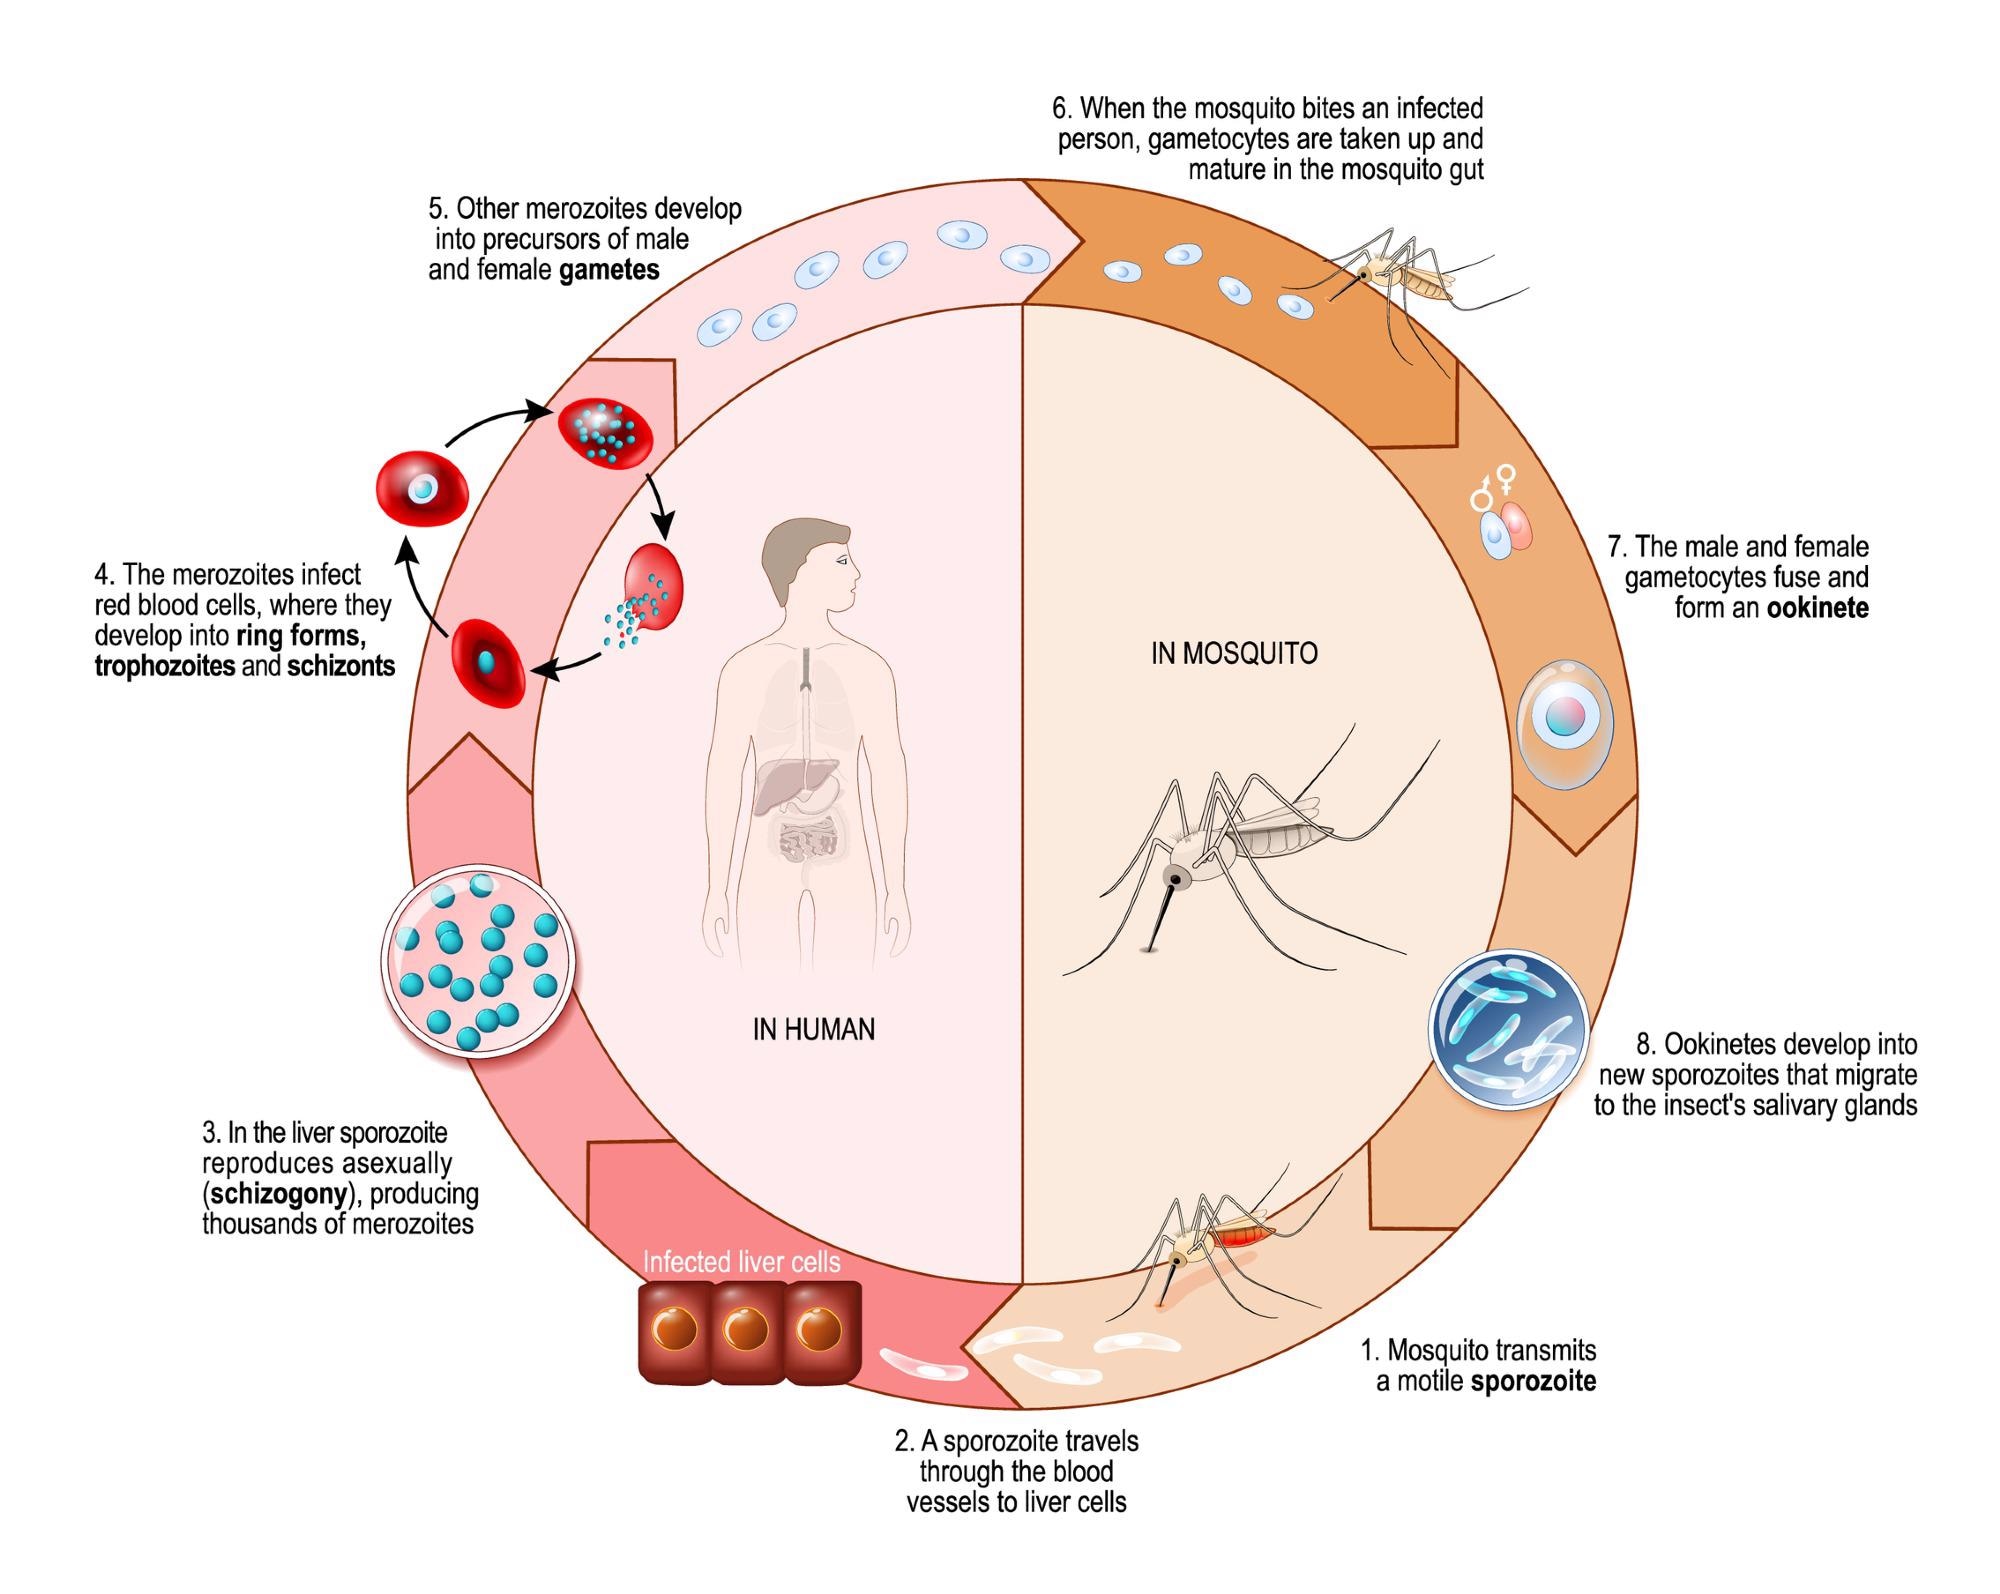 The life cycle of a malaria parasite